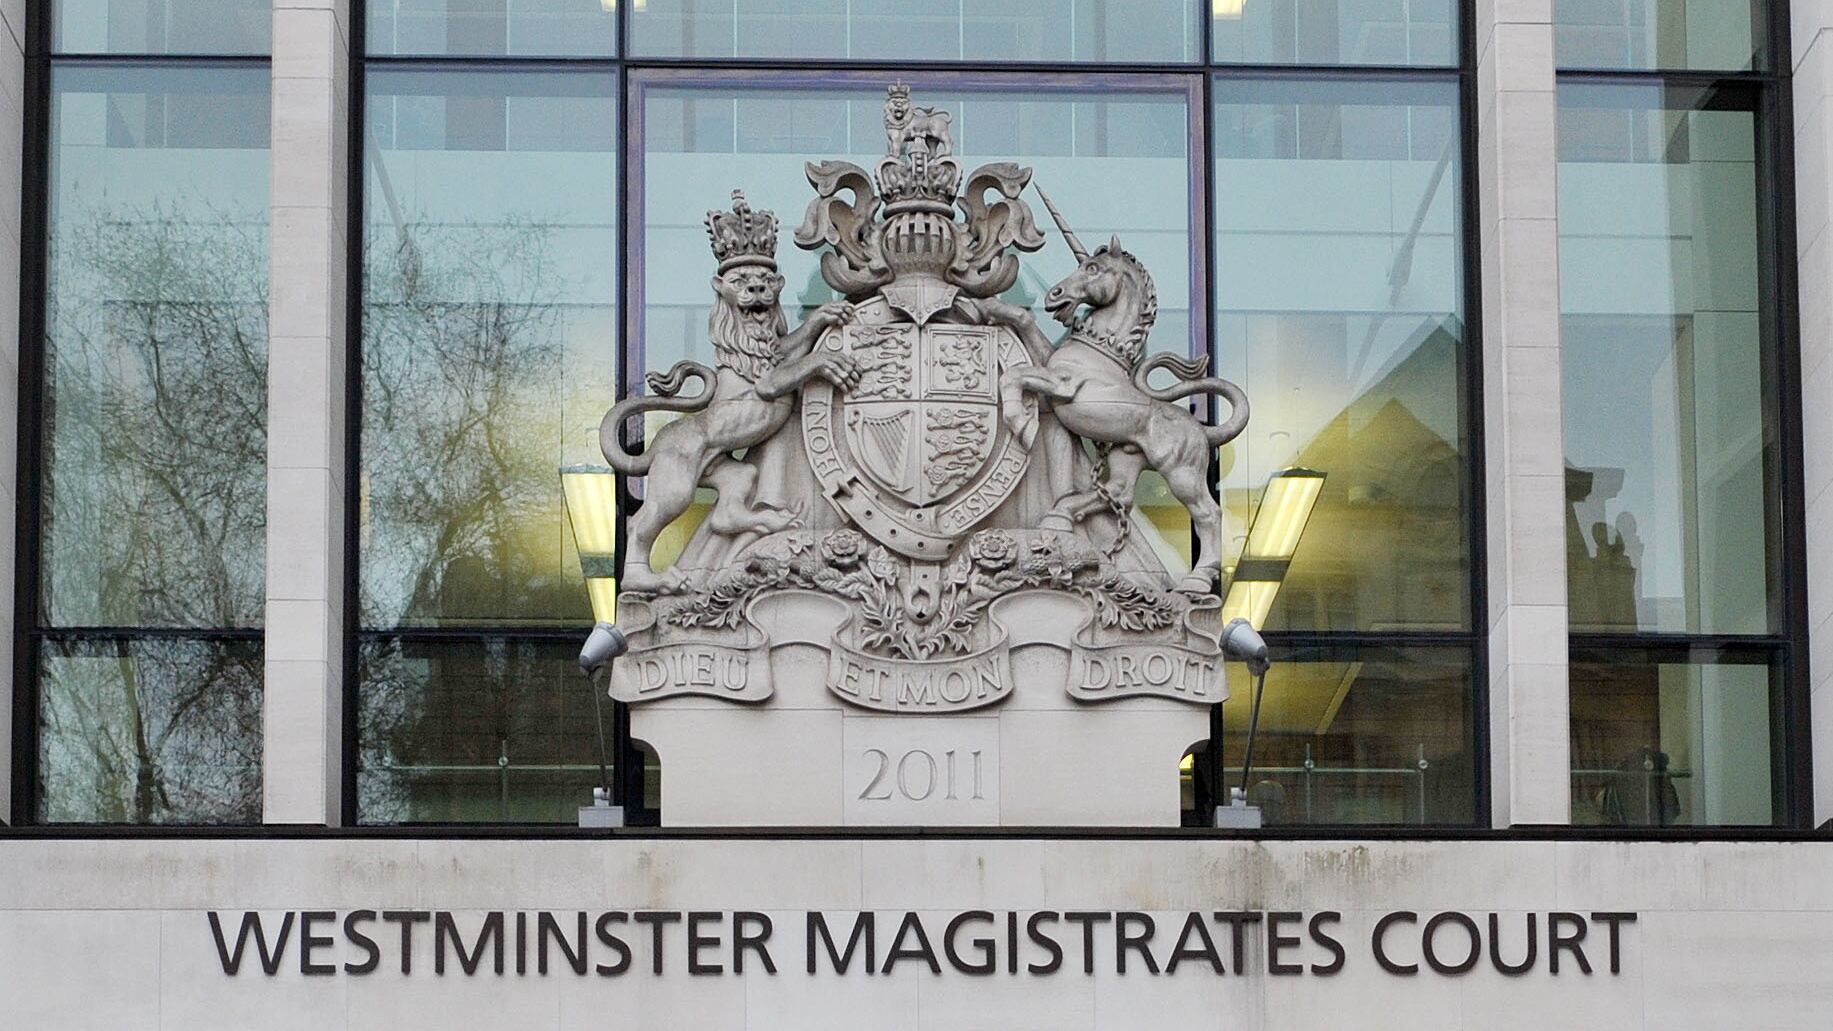 A hearing was held at Westminster Magistrates’ Court in London